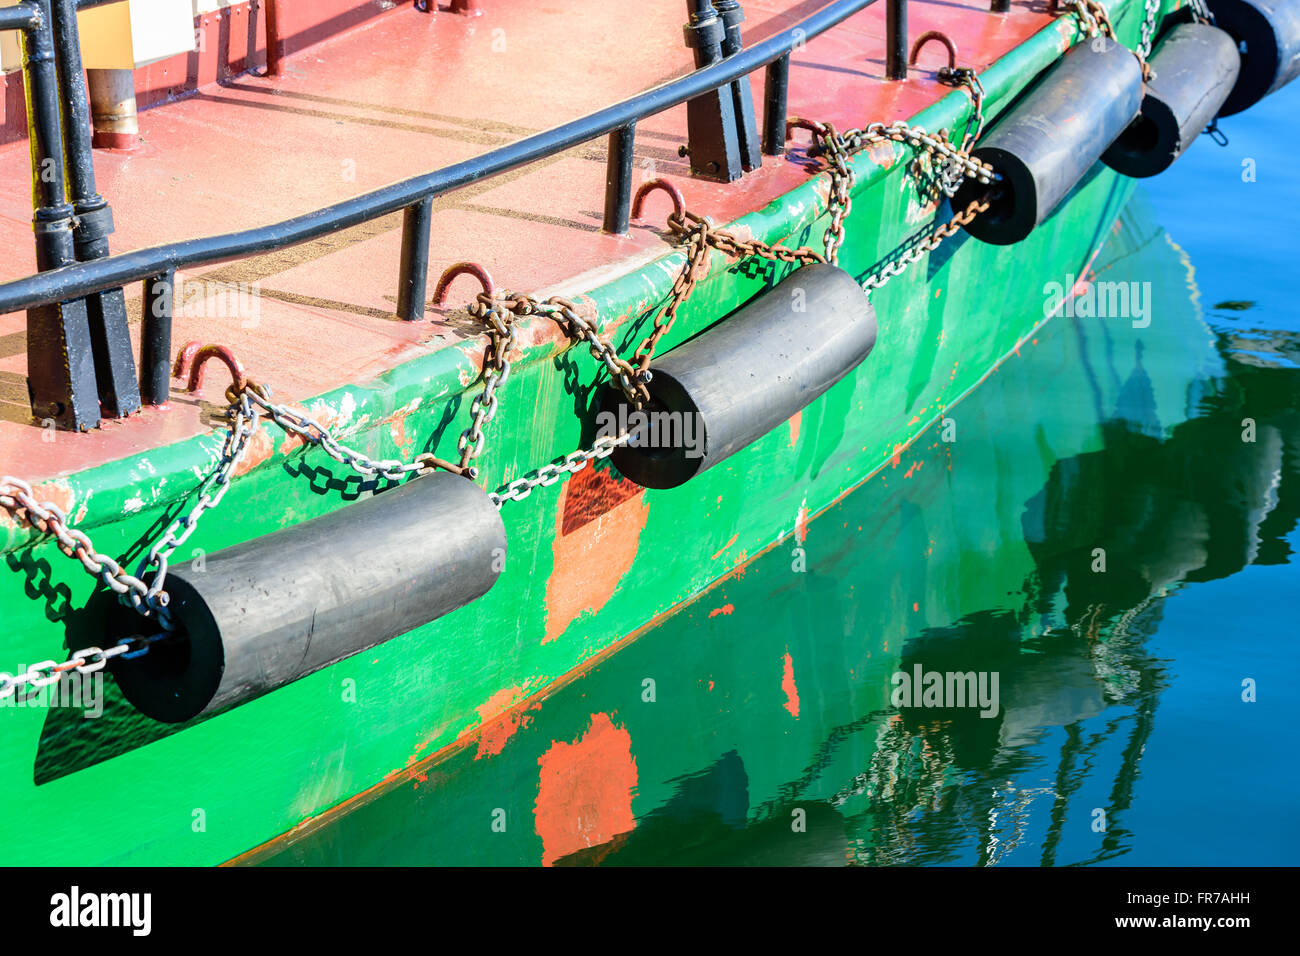 A green boat keel with black rubber bumpers in reflective water. Stock Photo